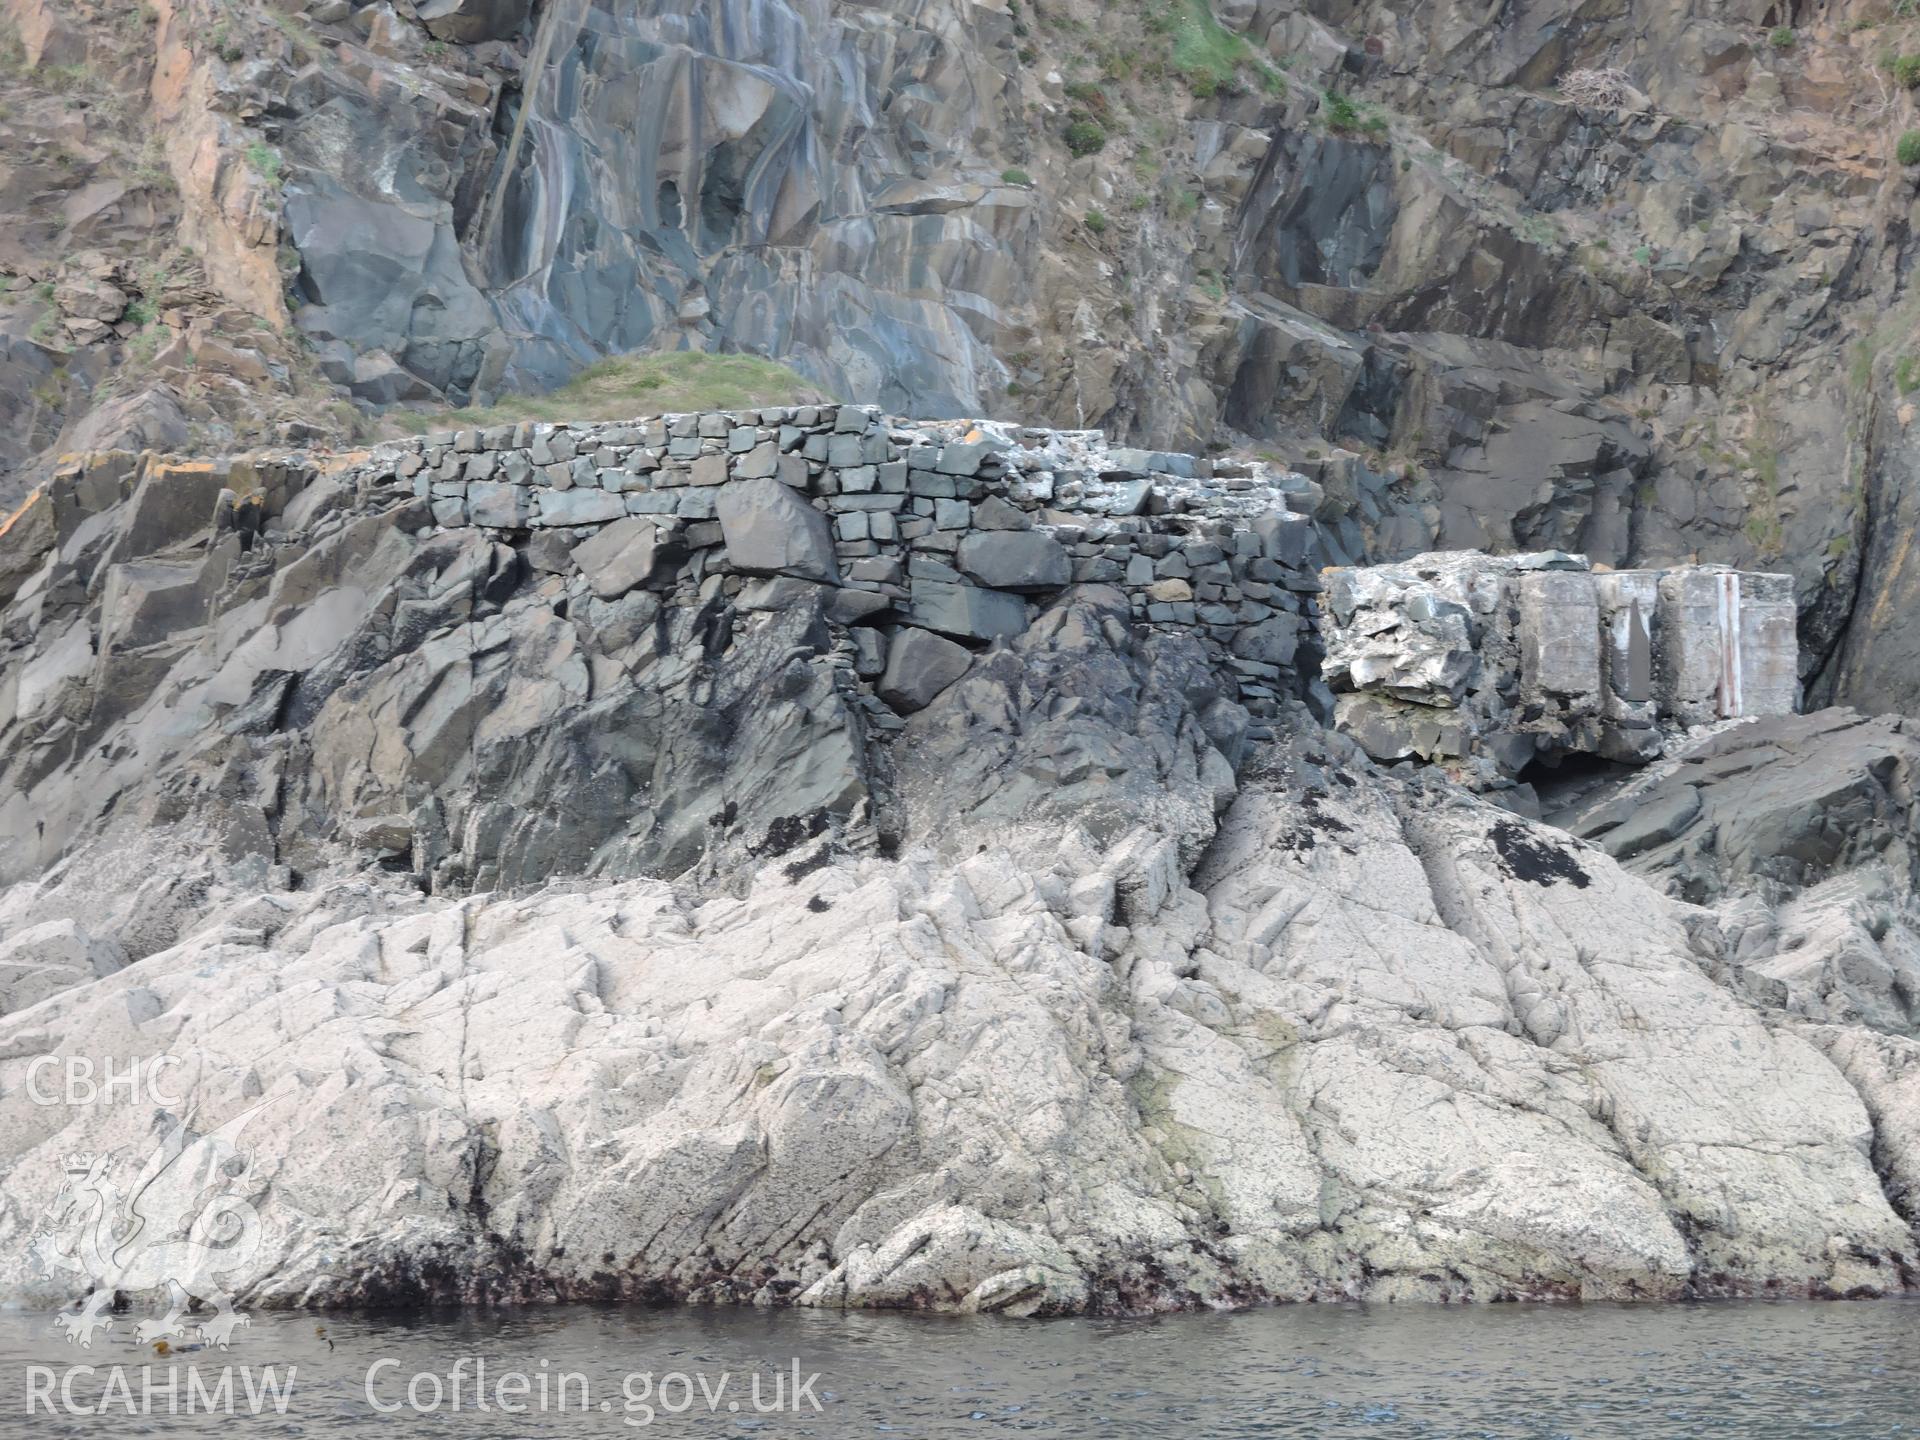 Detailed view showing the remains of the stone walls of the quay, viewed from the sea. Part of a digital photographic survey of Porth y Pistyll, Aberdaron, produced in 2020 by Michael Statham.